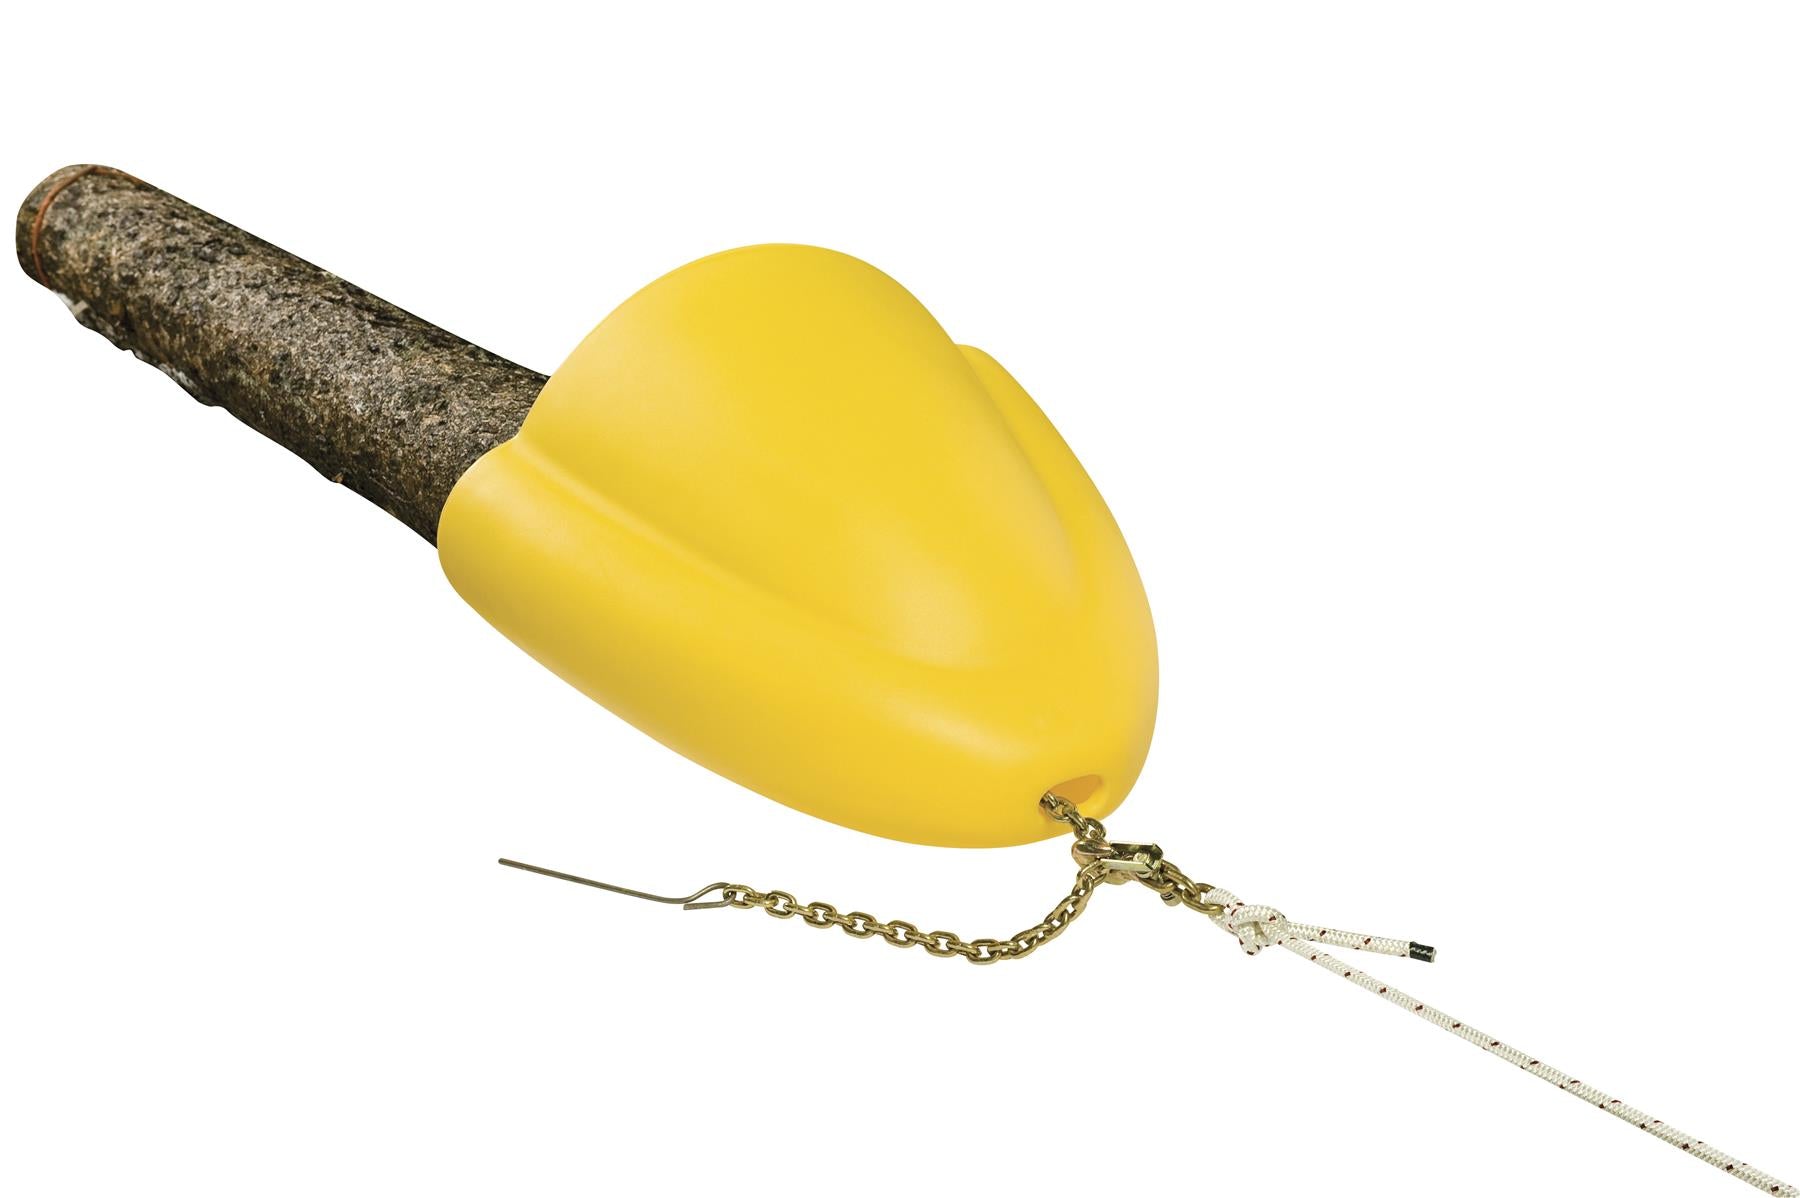 Portable Winch PCA-1290 Skidding Cone for Logs